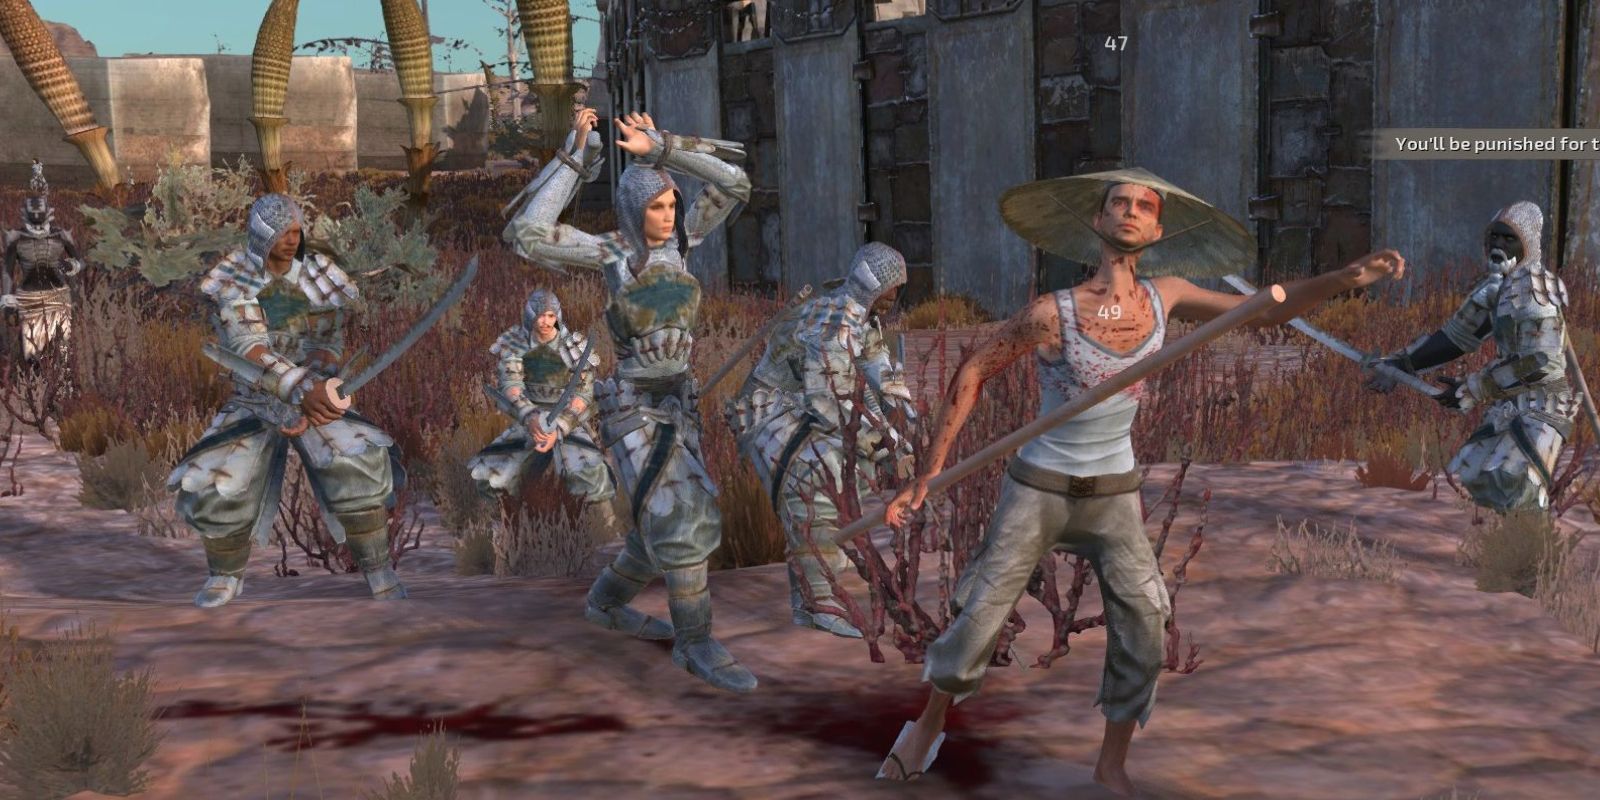 A female soldier is taken captive by other soldiers in a field in Kenshi.